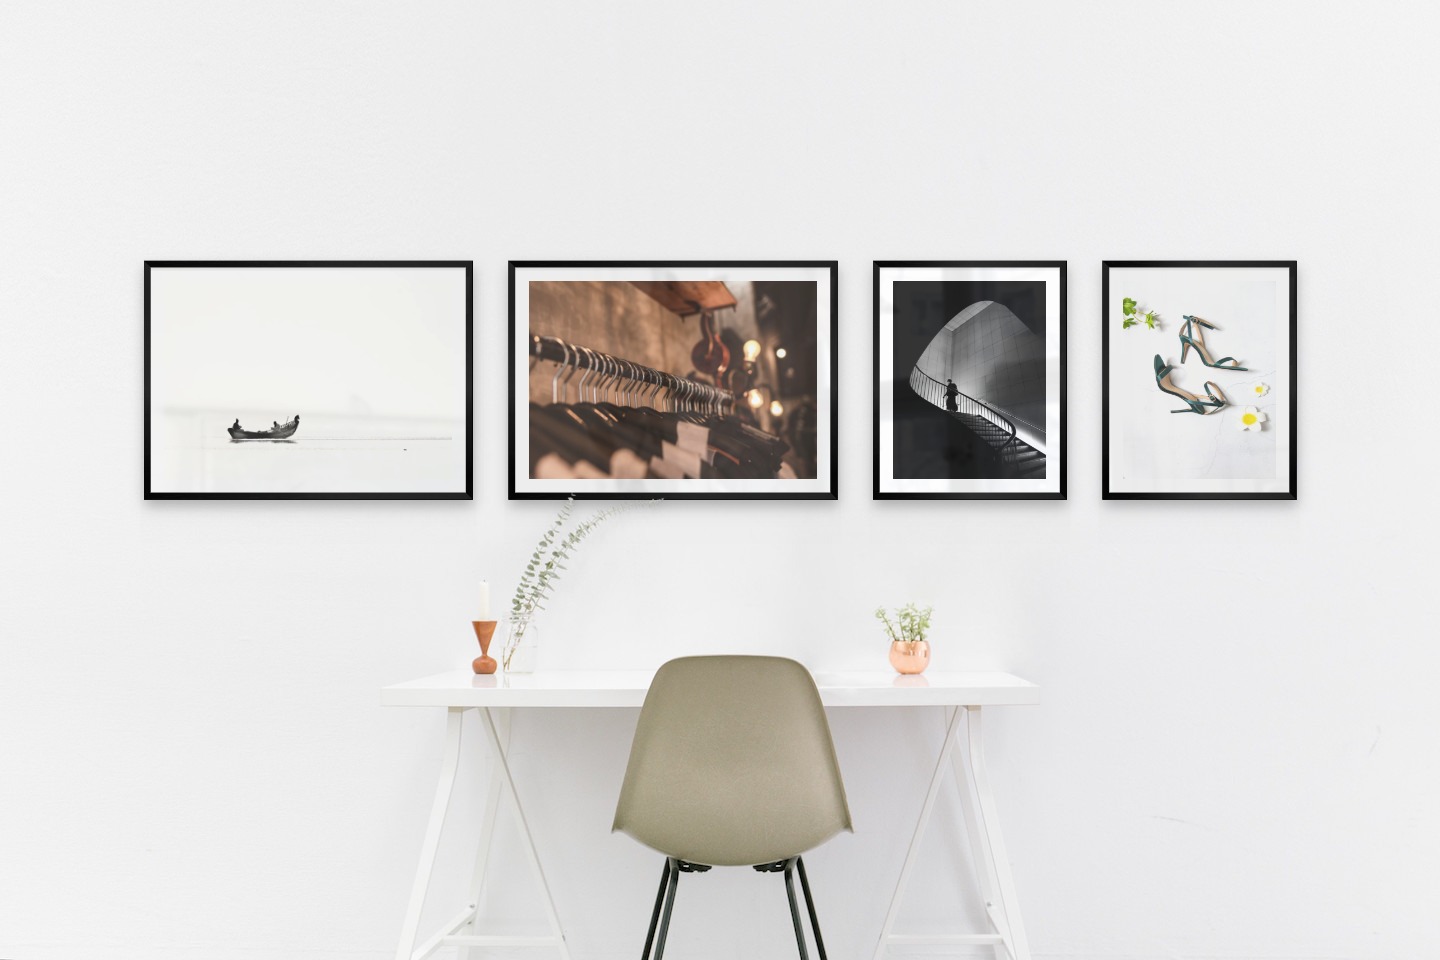 Gallery wall with picture frames in black in sizes 50x70 and 40x50 with prints "People in boat", "Clothes hangers", "Staircase" and "Heels"